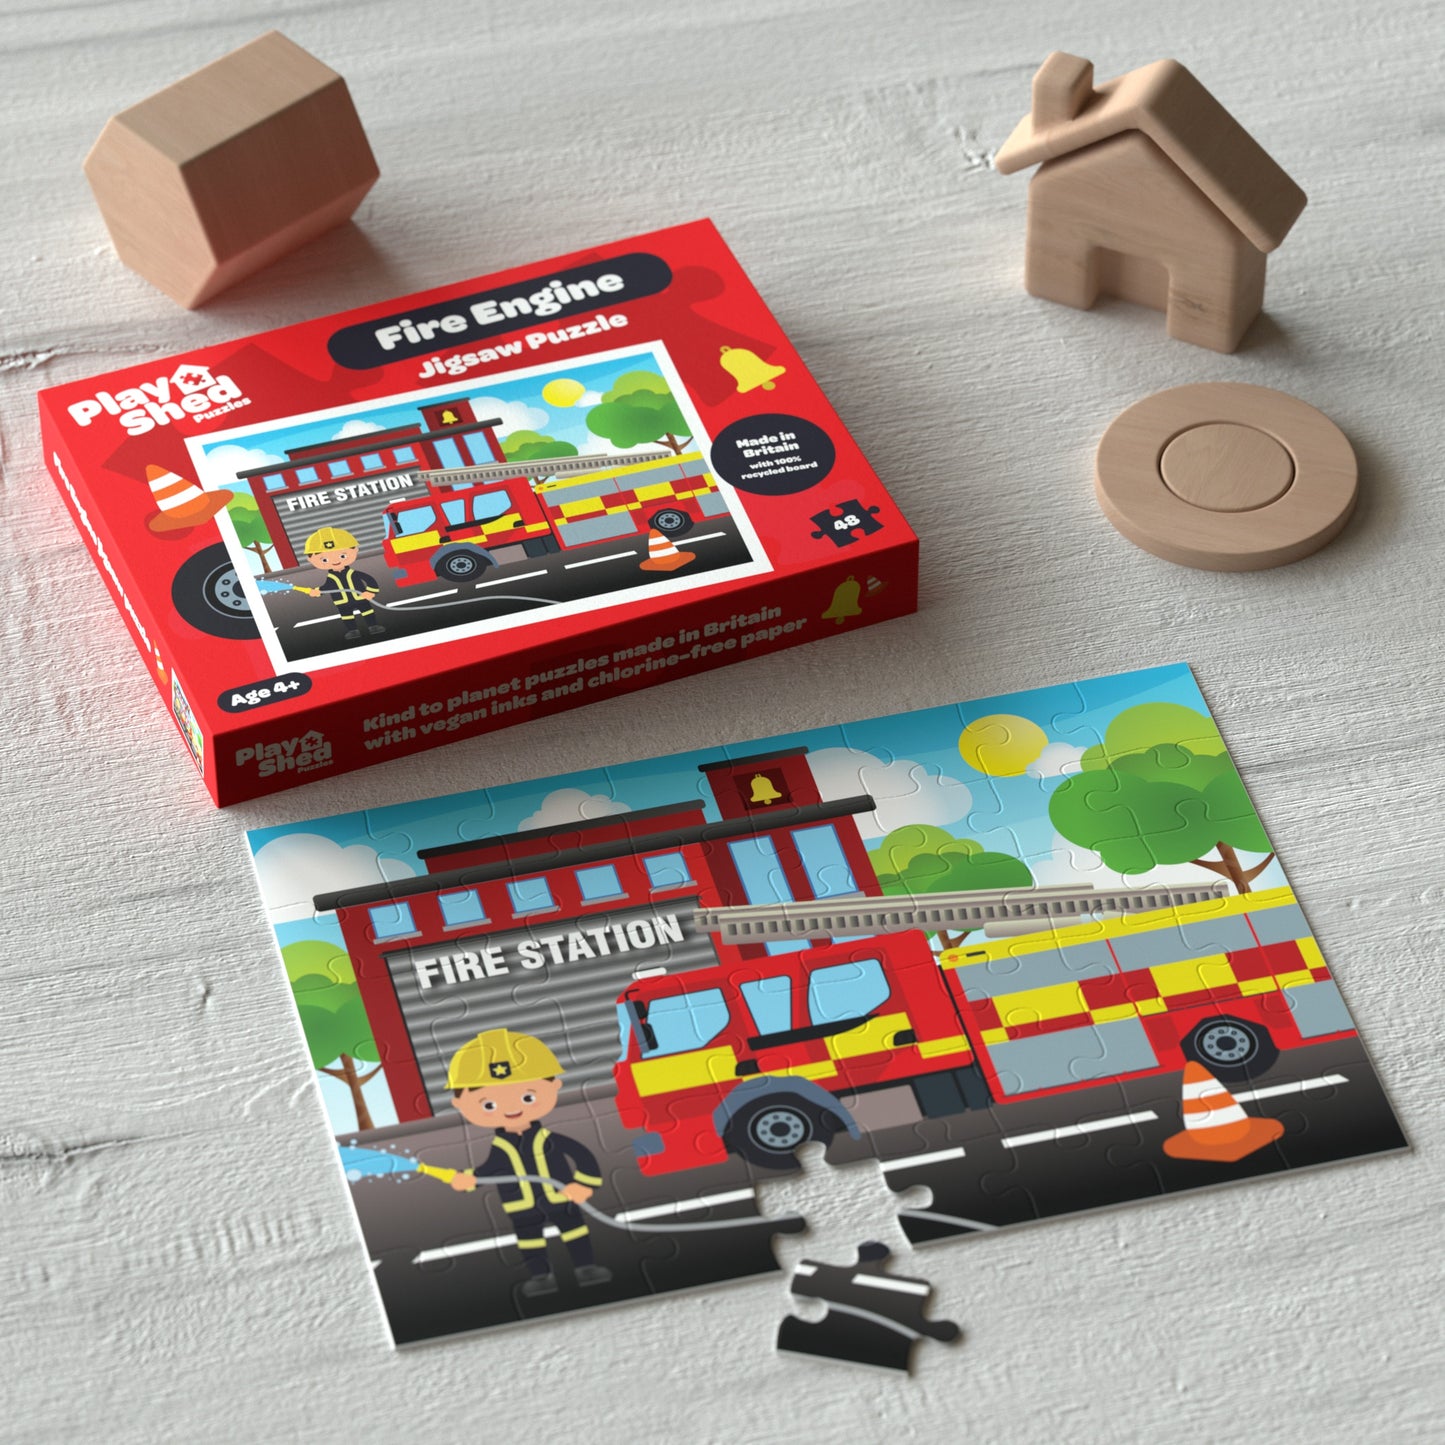 Fire Engine jigsaw puzzle